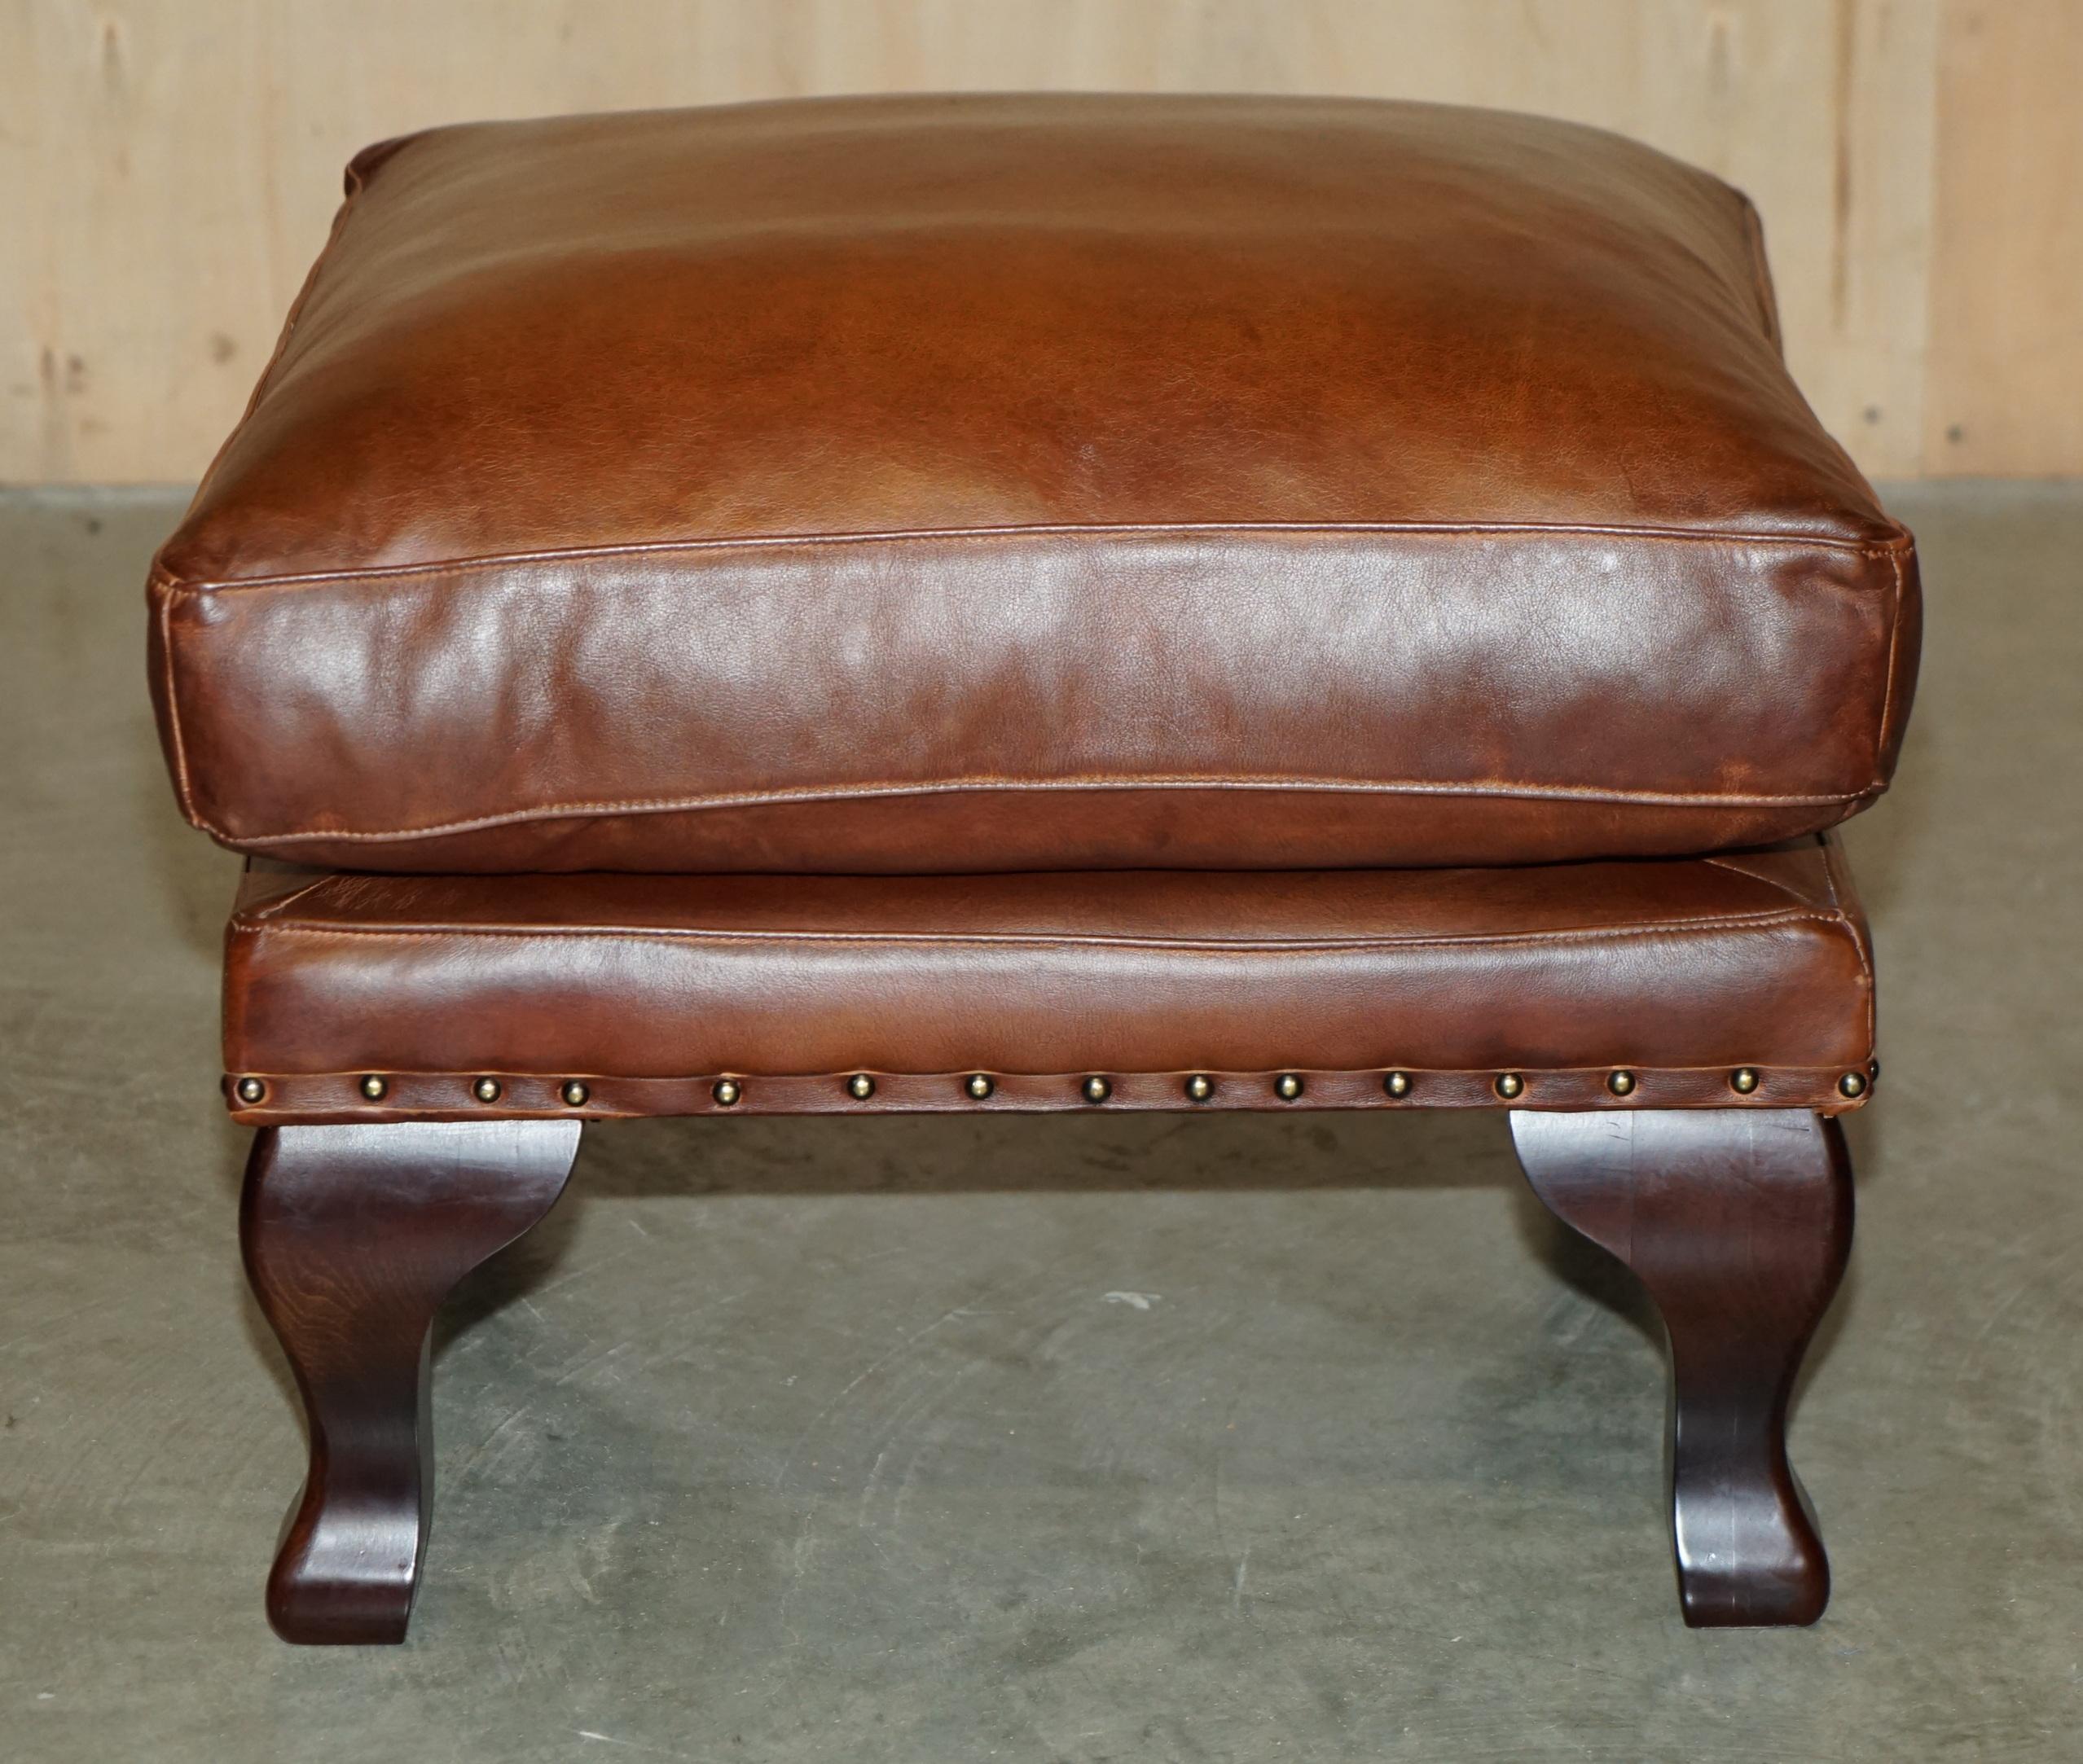 TETRAD BROWN LEATHER LARGE FOOTSTOOL LARGE ENoUGH FOR TWO PEOPLE TO SHARE (Leder) im Angebot